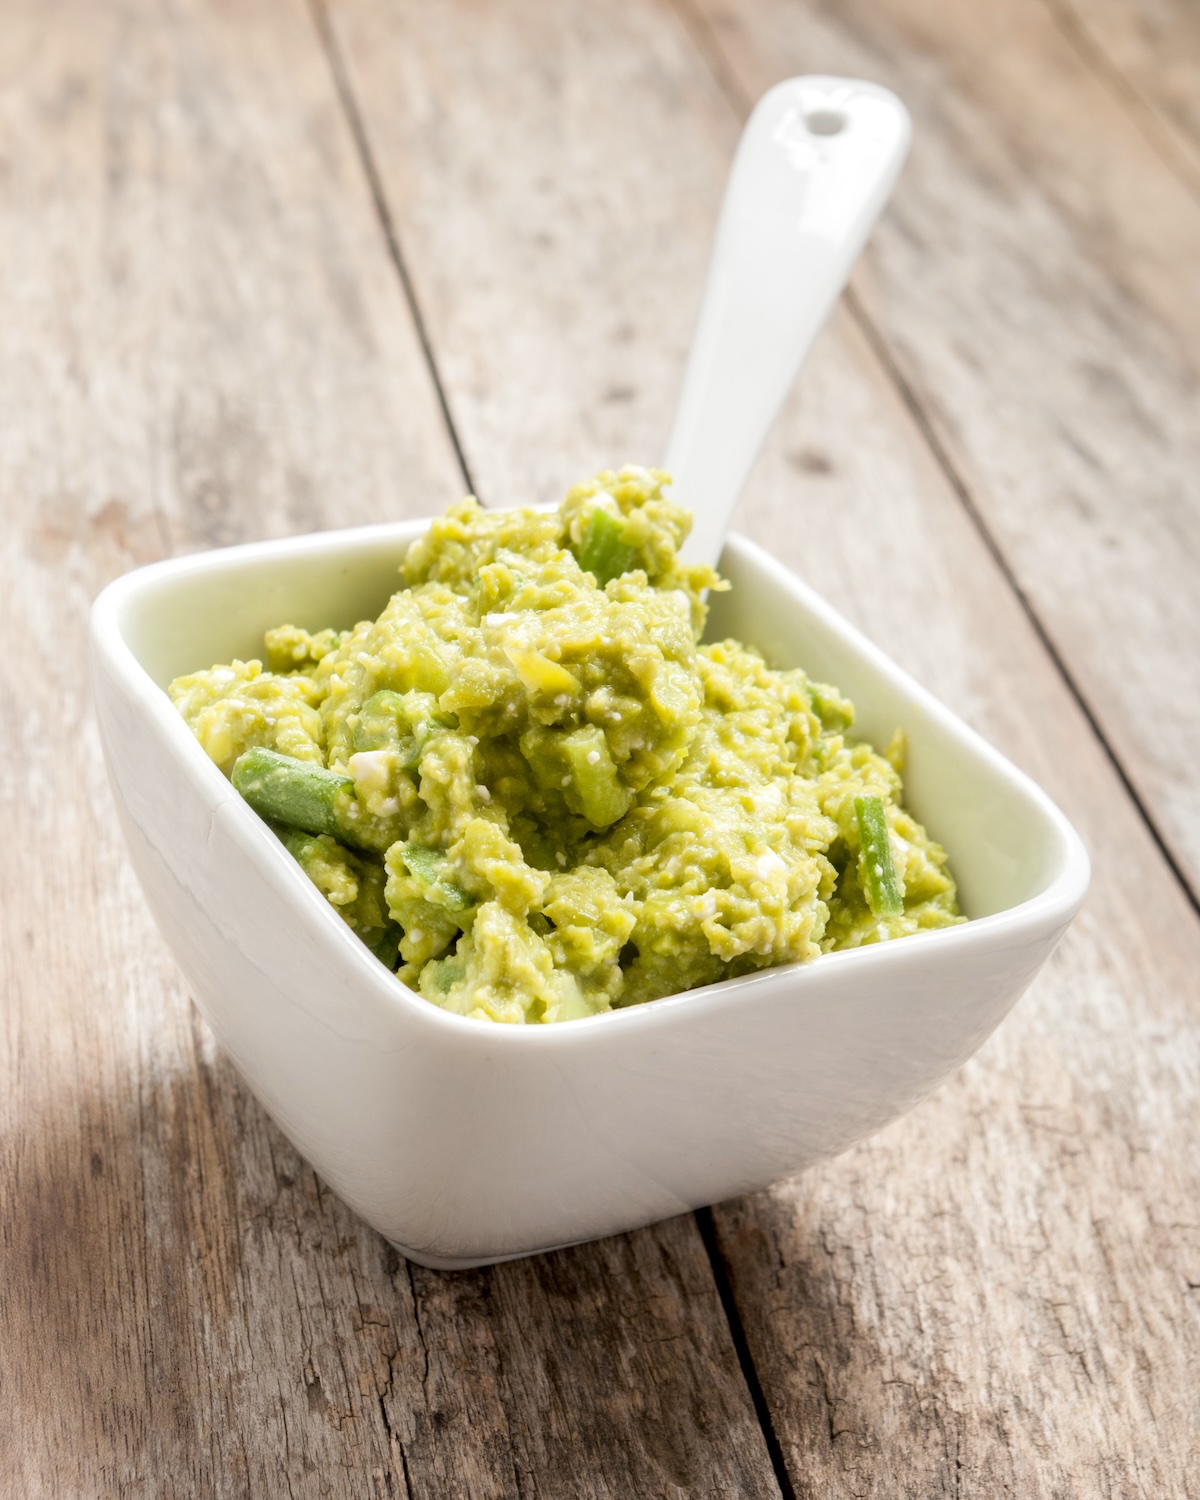 Guacamole Appetizer Healthy Snack in White Bowl